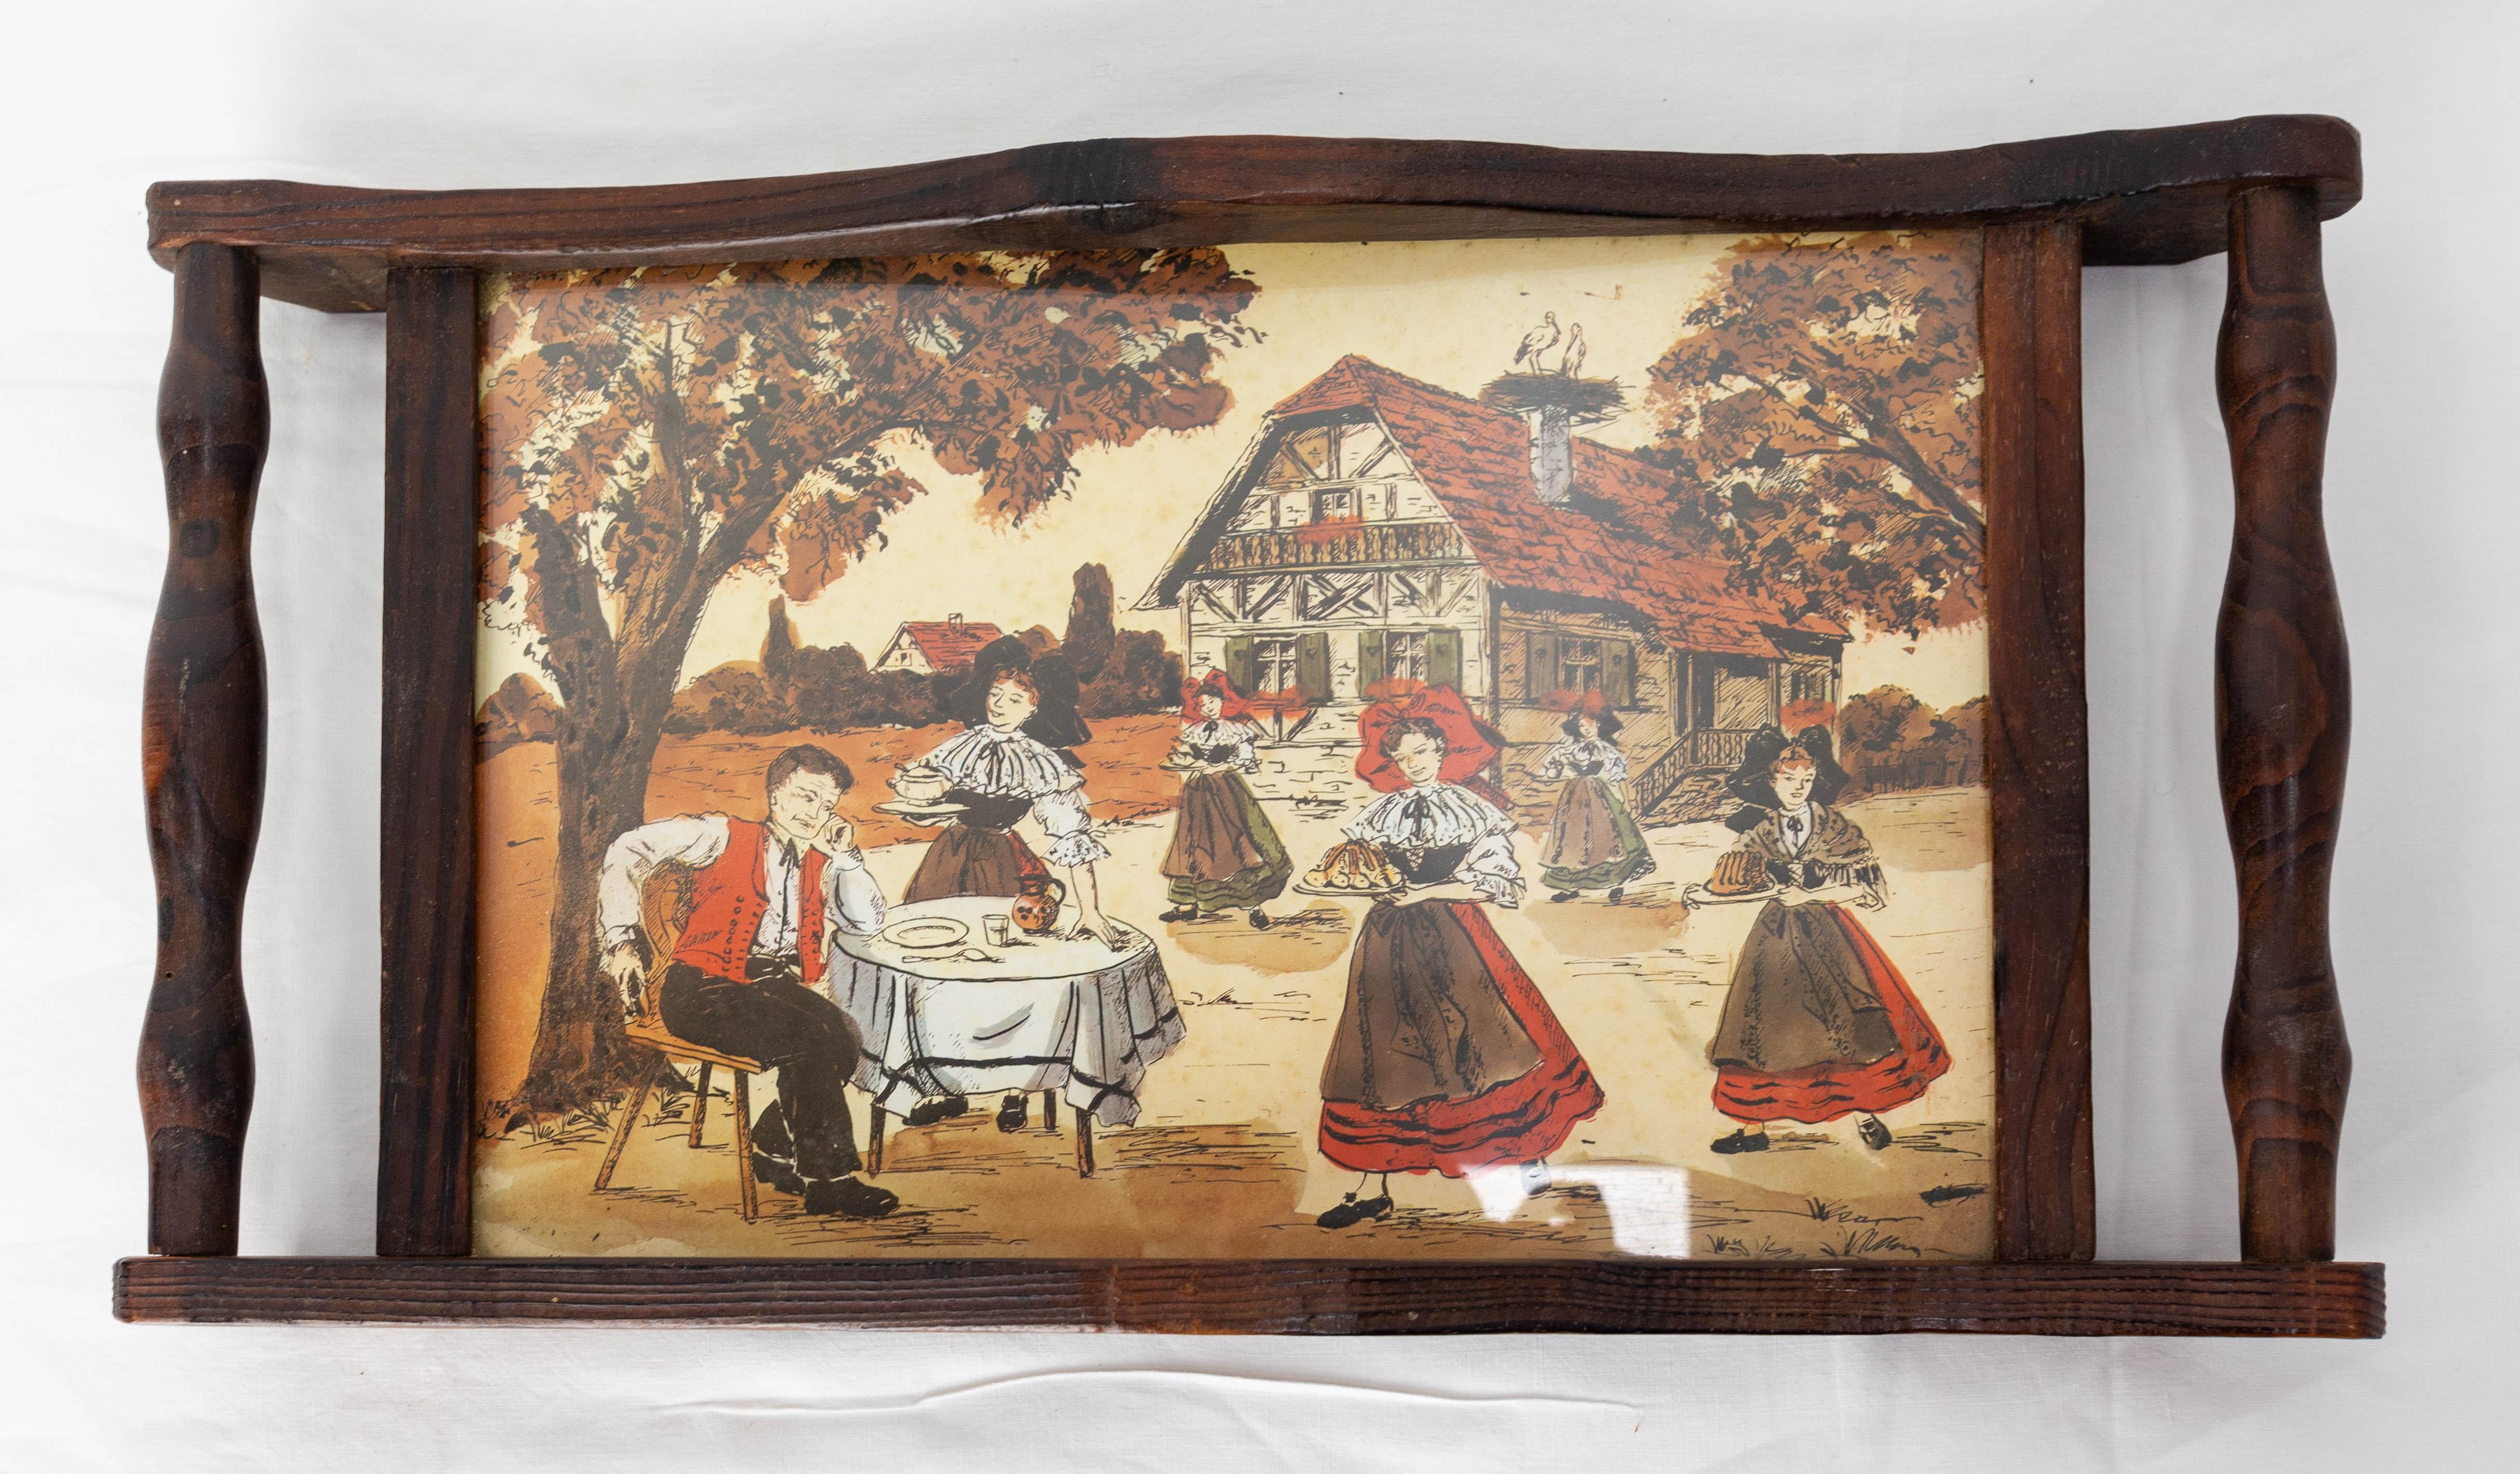 Tray with an ilustration with typical details of Alsace, the border region between France and Germany: women’s headdresses and storks on chimneys
Pine and glass
Good condition

Shipping:
5.5 / 50 / 26.5 cm 1.3 kg.